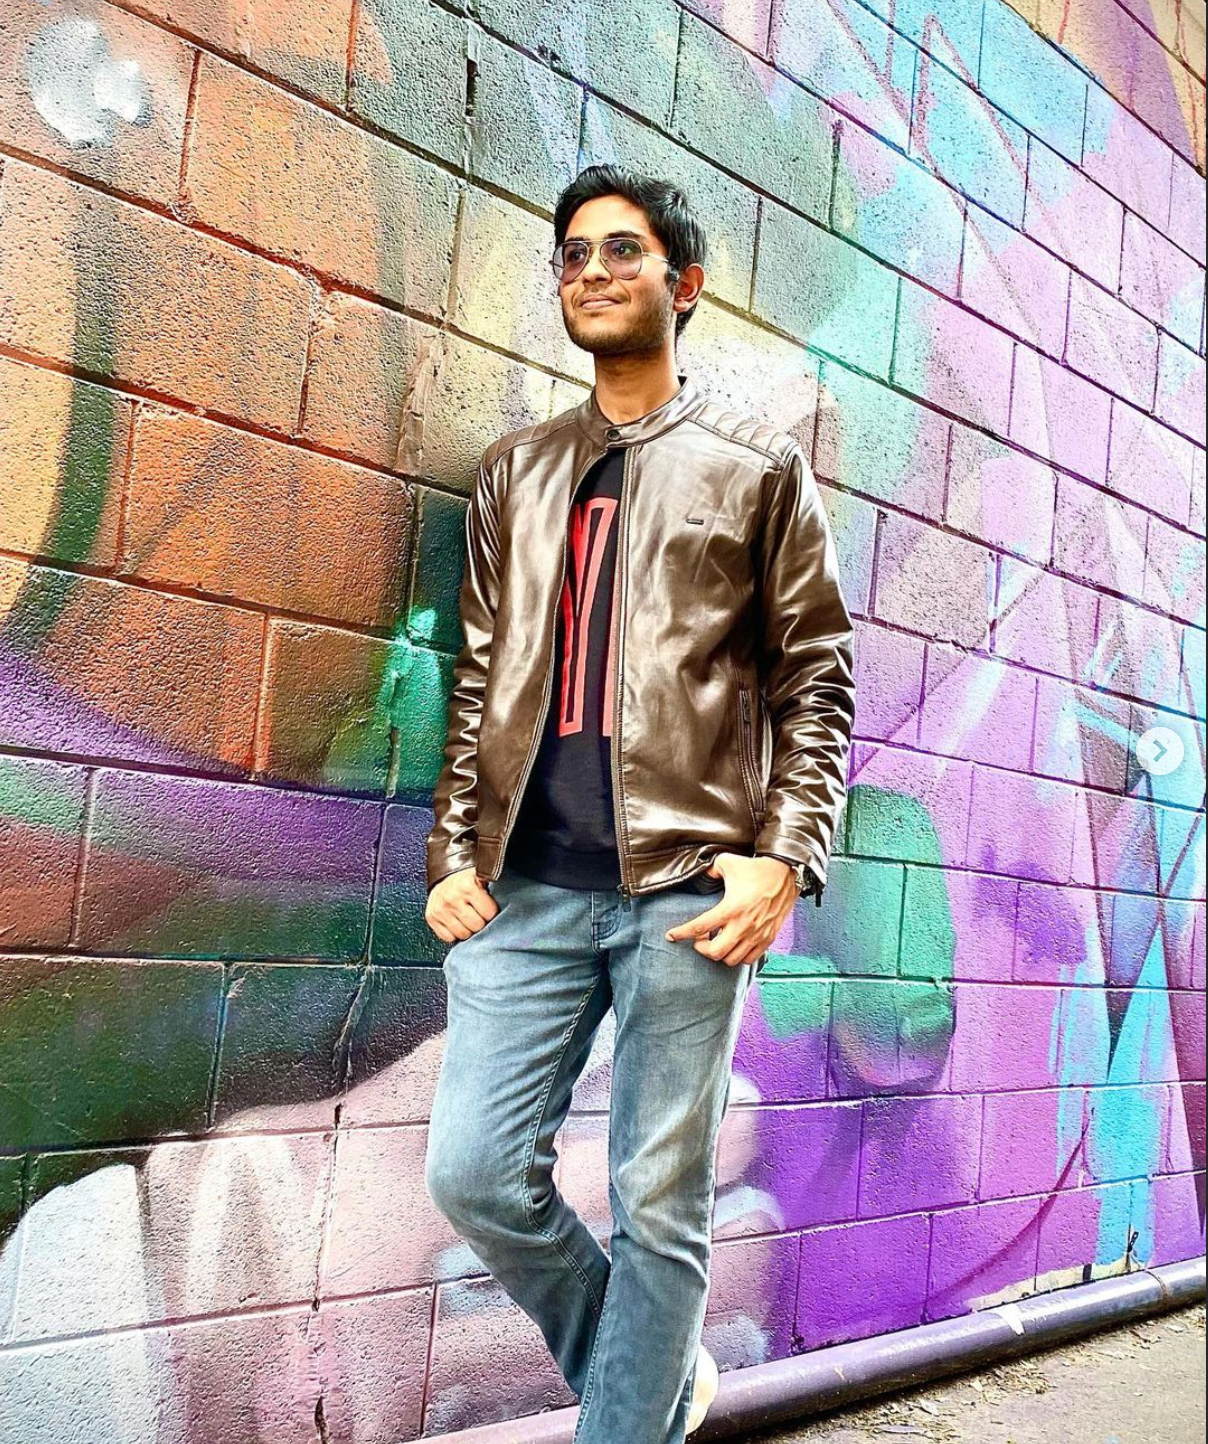 Arnav leaning against a colourful wall.